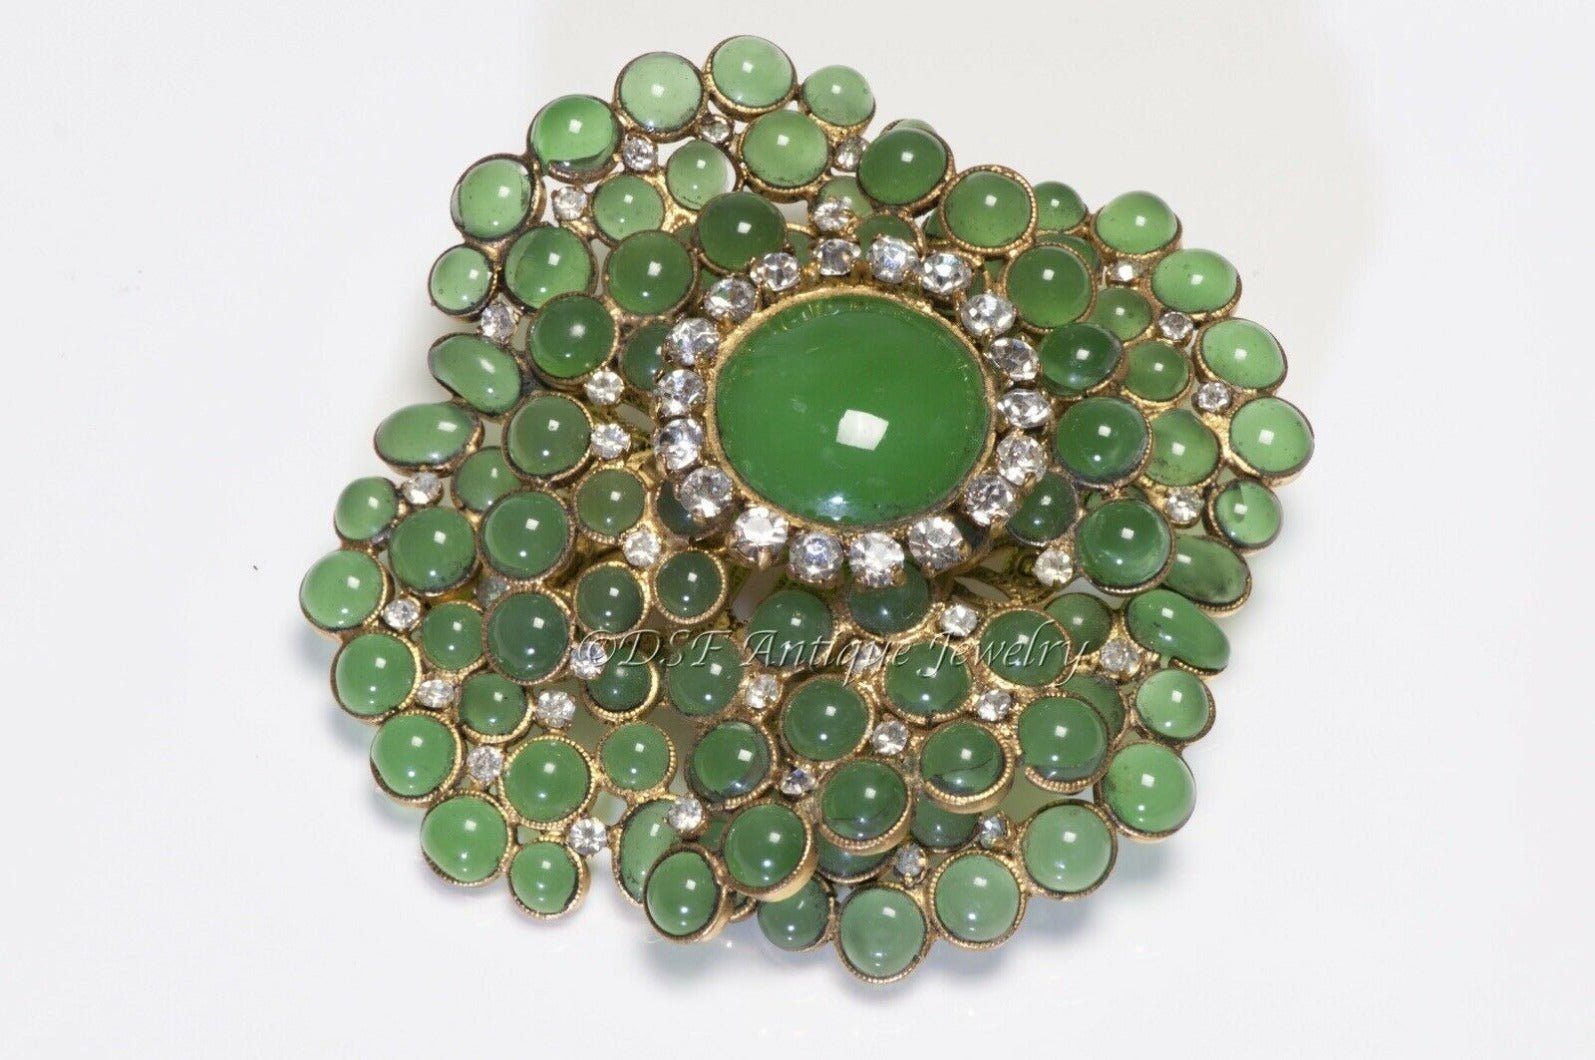 CHANEL Paris 1990’s Maison Gripoix Green Glass Crystal Camellia Flower Brooch - DSF Antique Jewelry